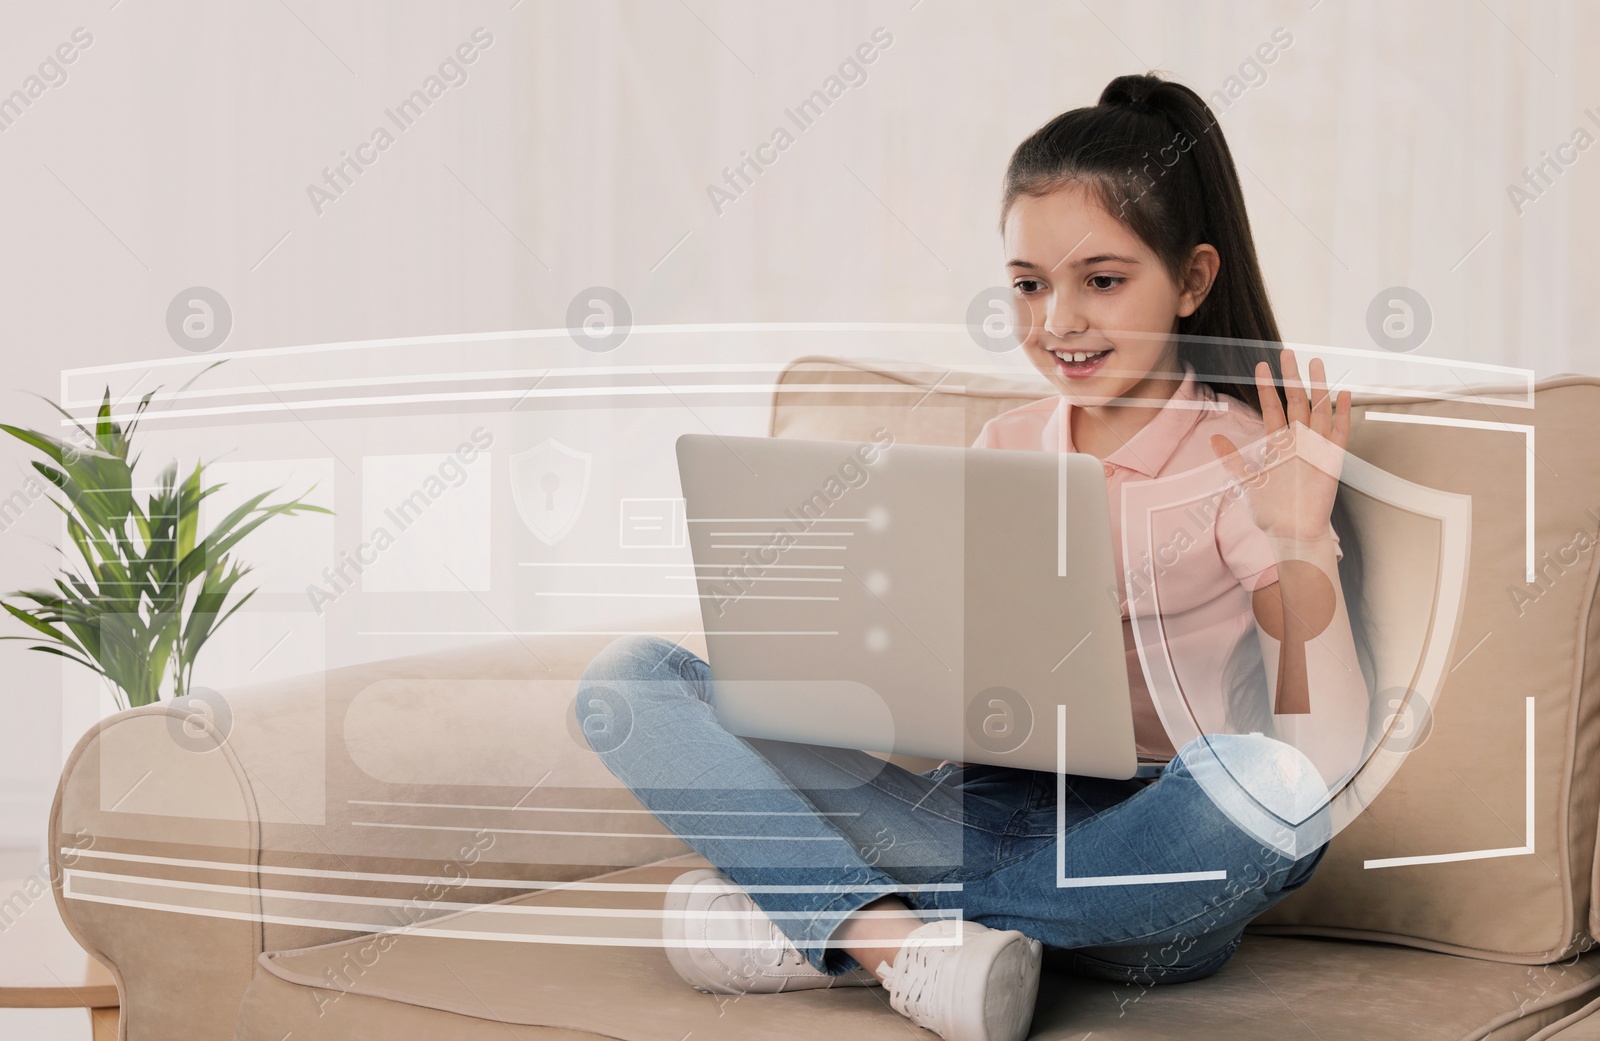 Image of Child safety online. Little girl using laptop at home. Illustration of internet blocking app on foreground